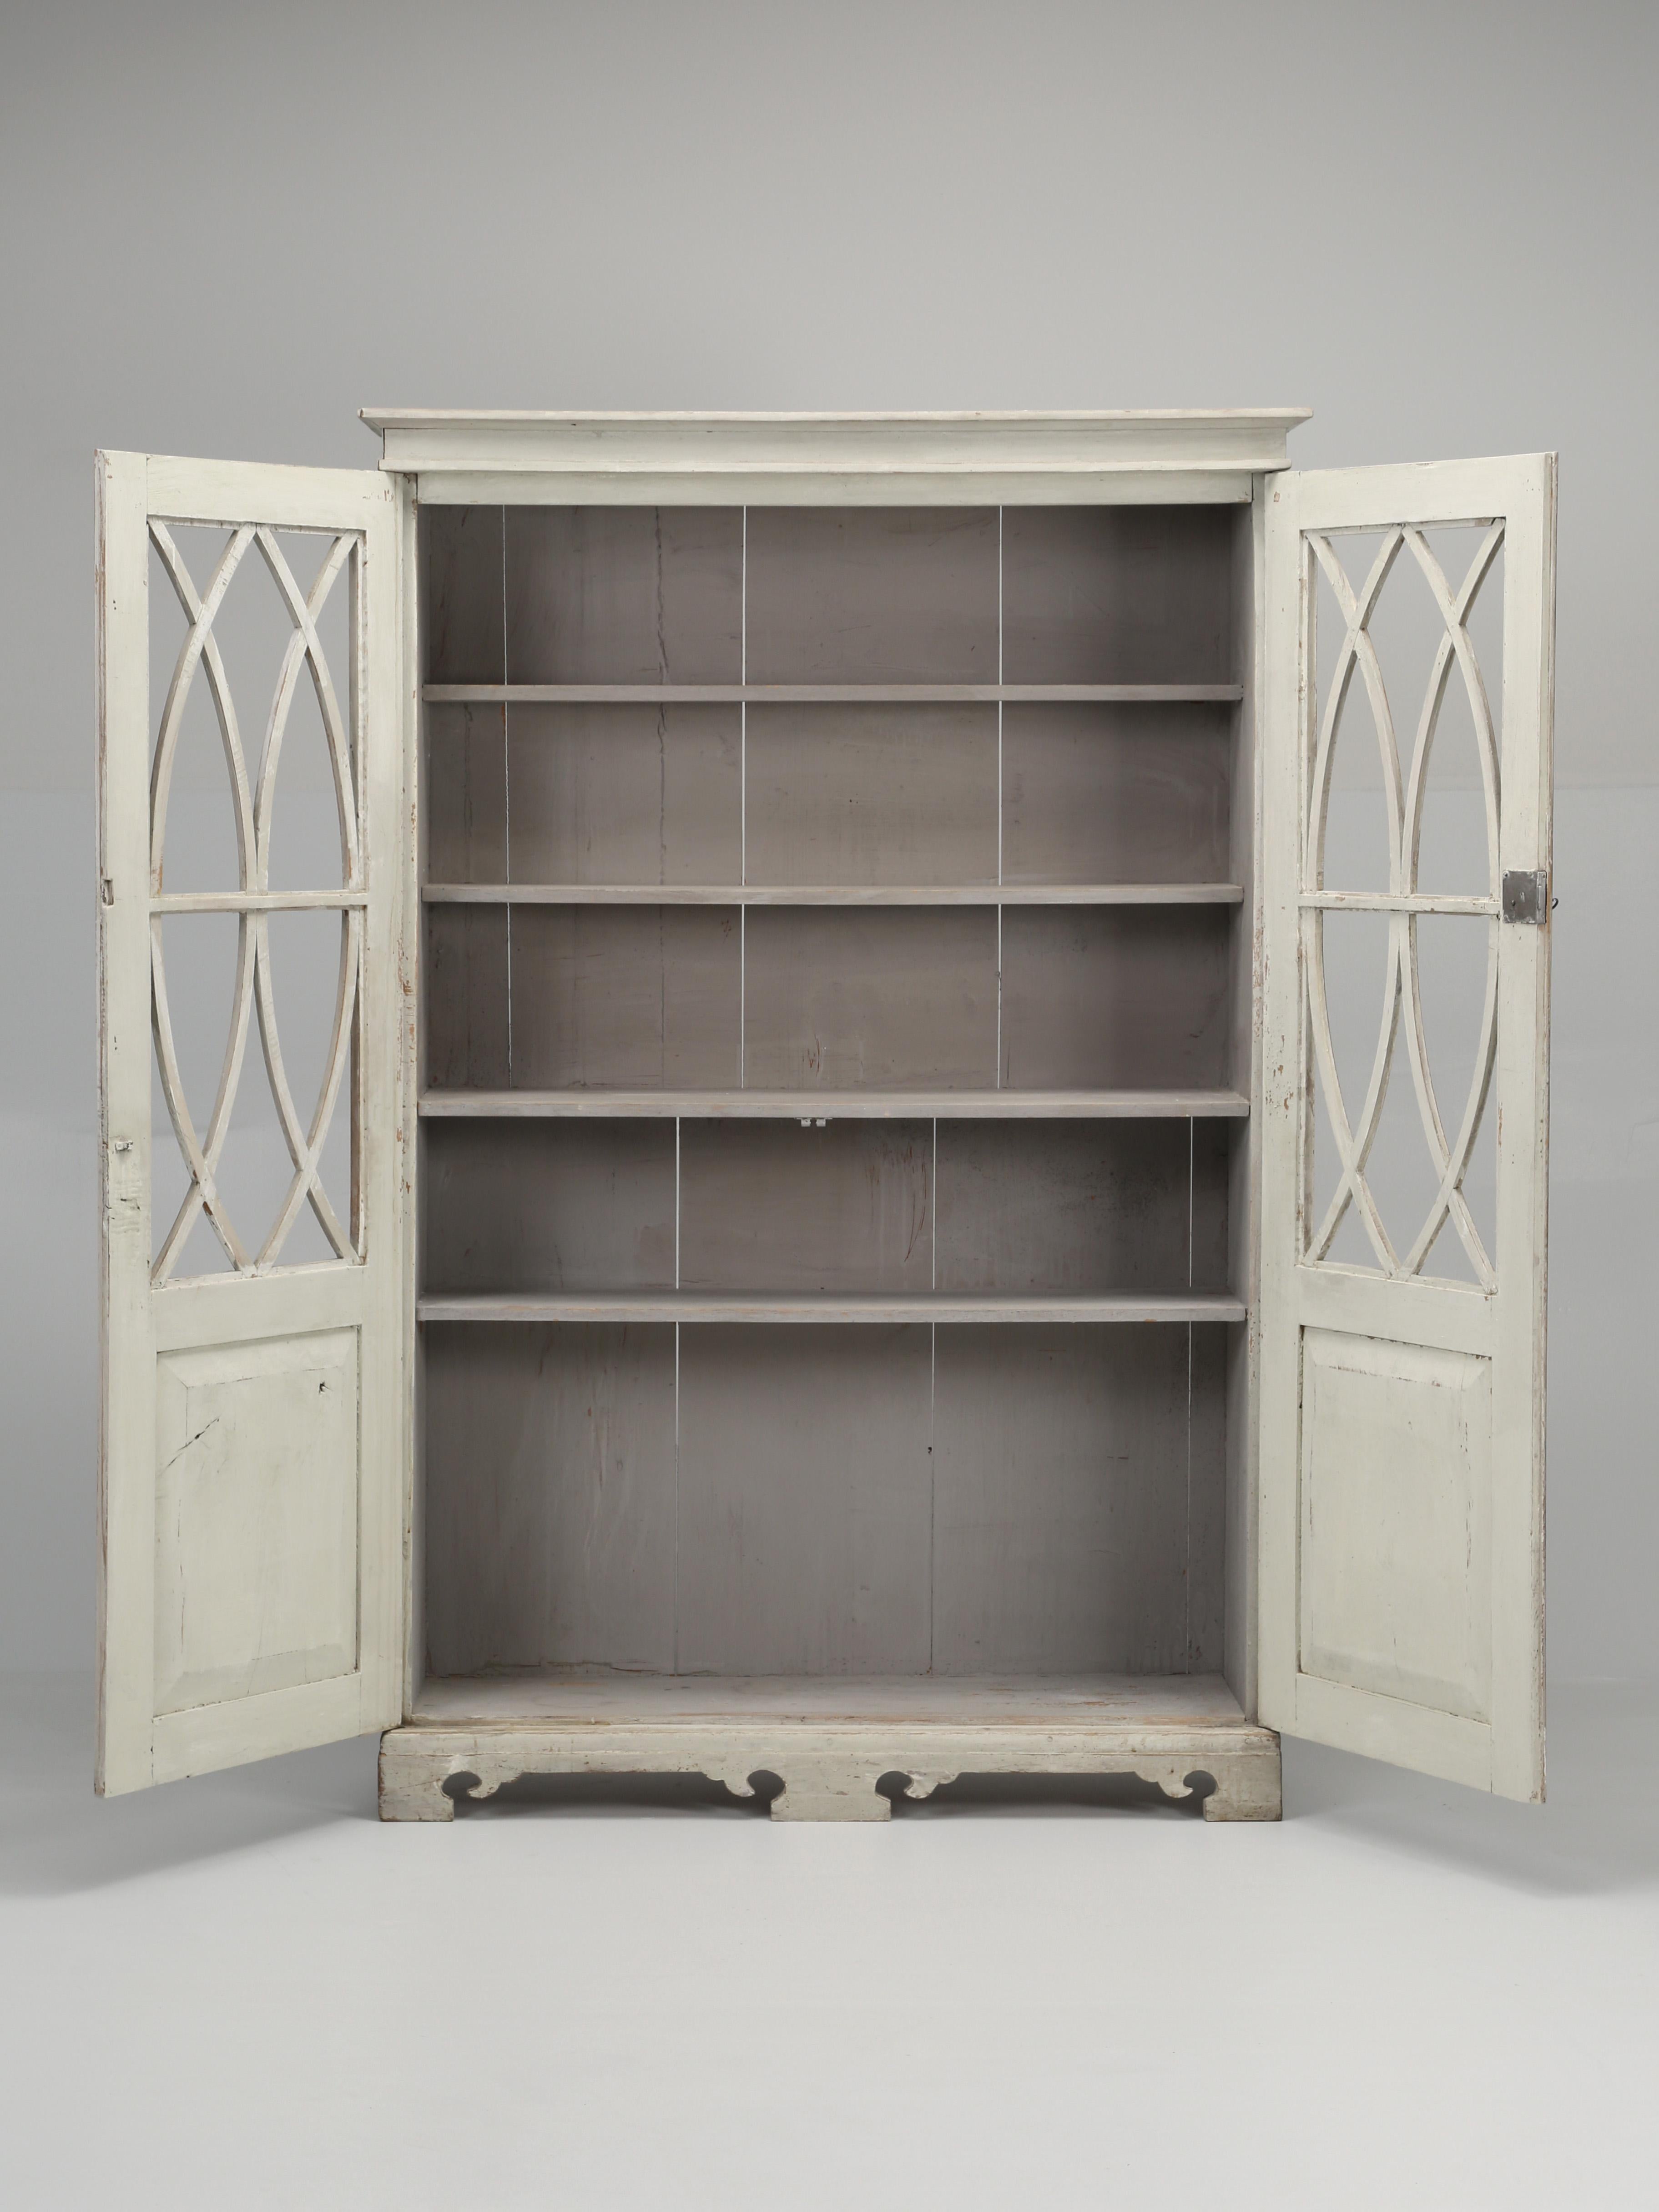 Antique Bookcase or Display Cabinet with Enhanced Recent Paint 6